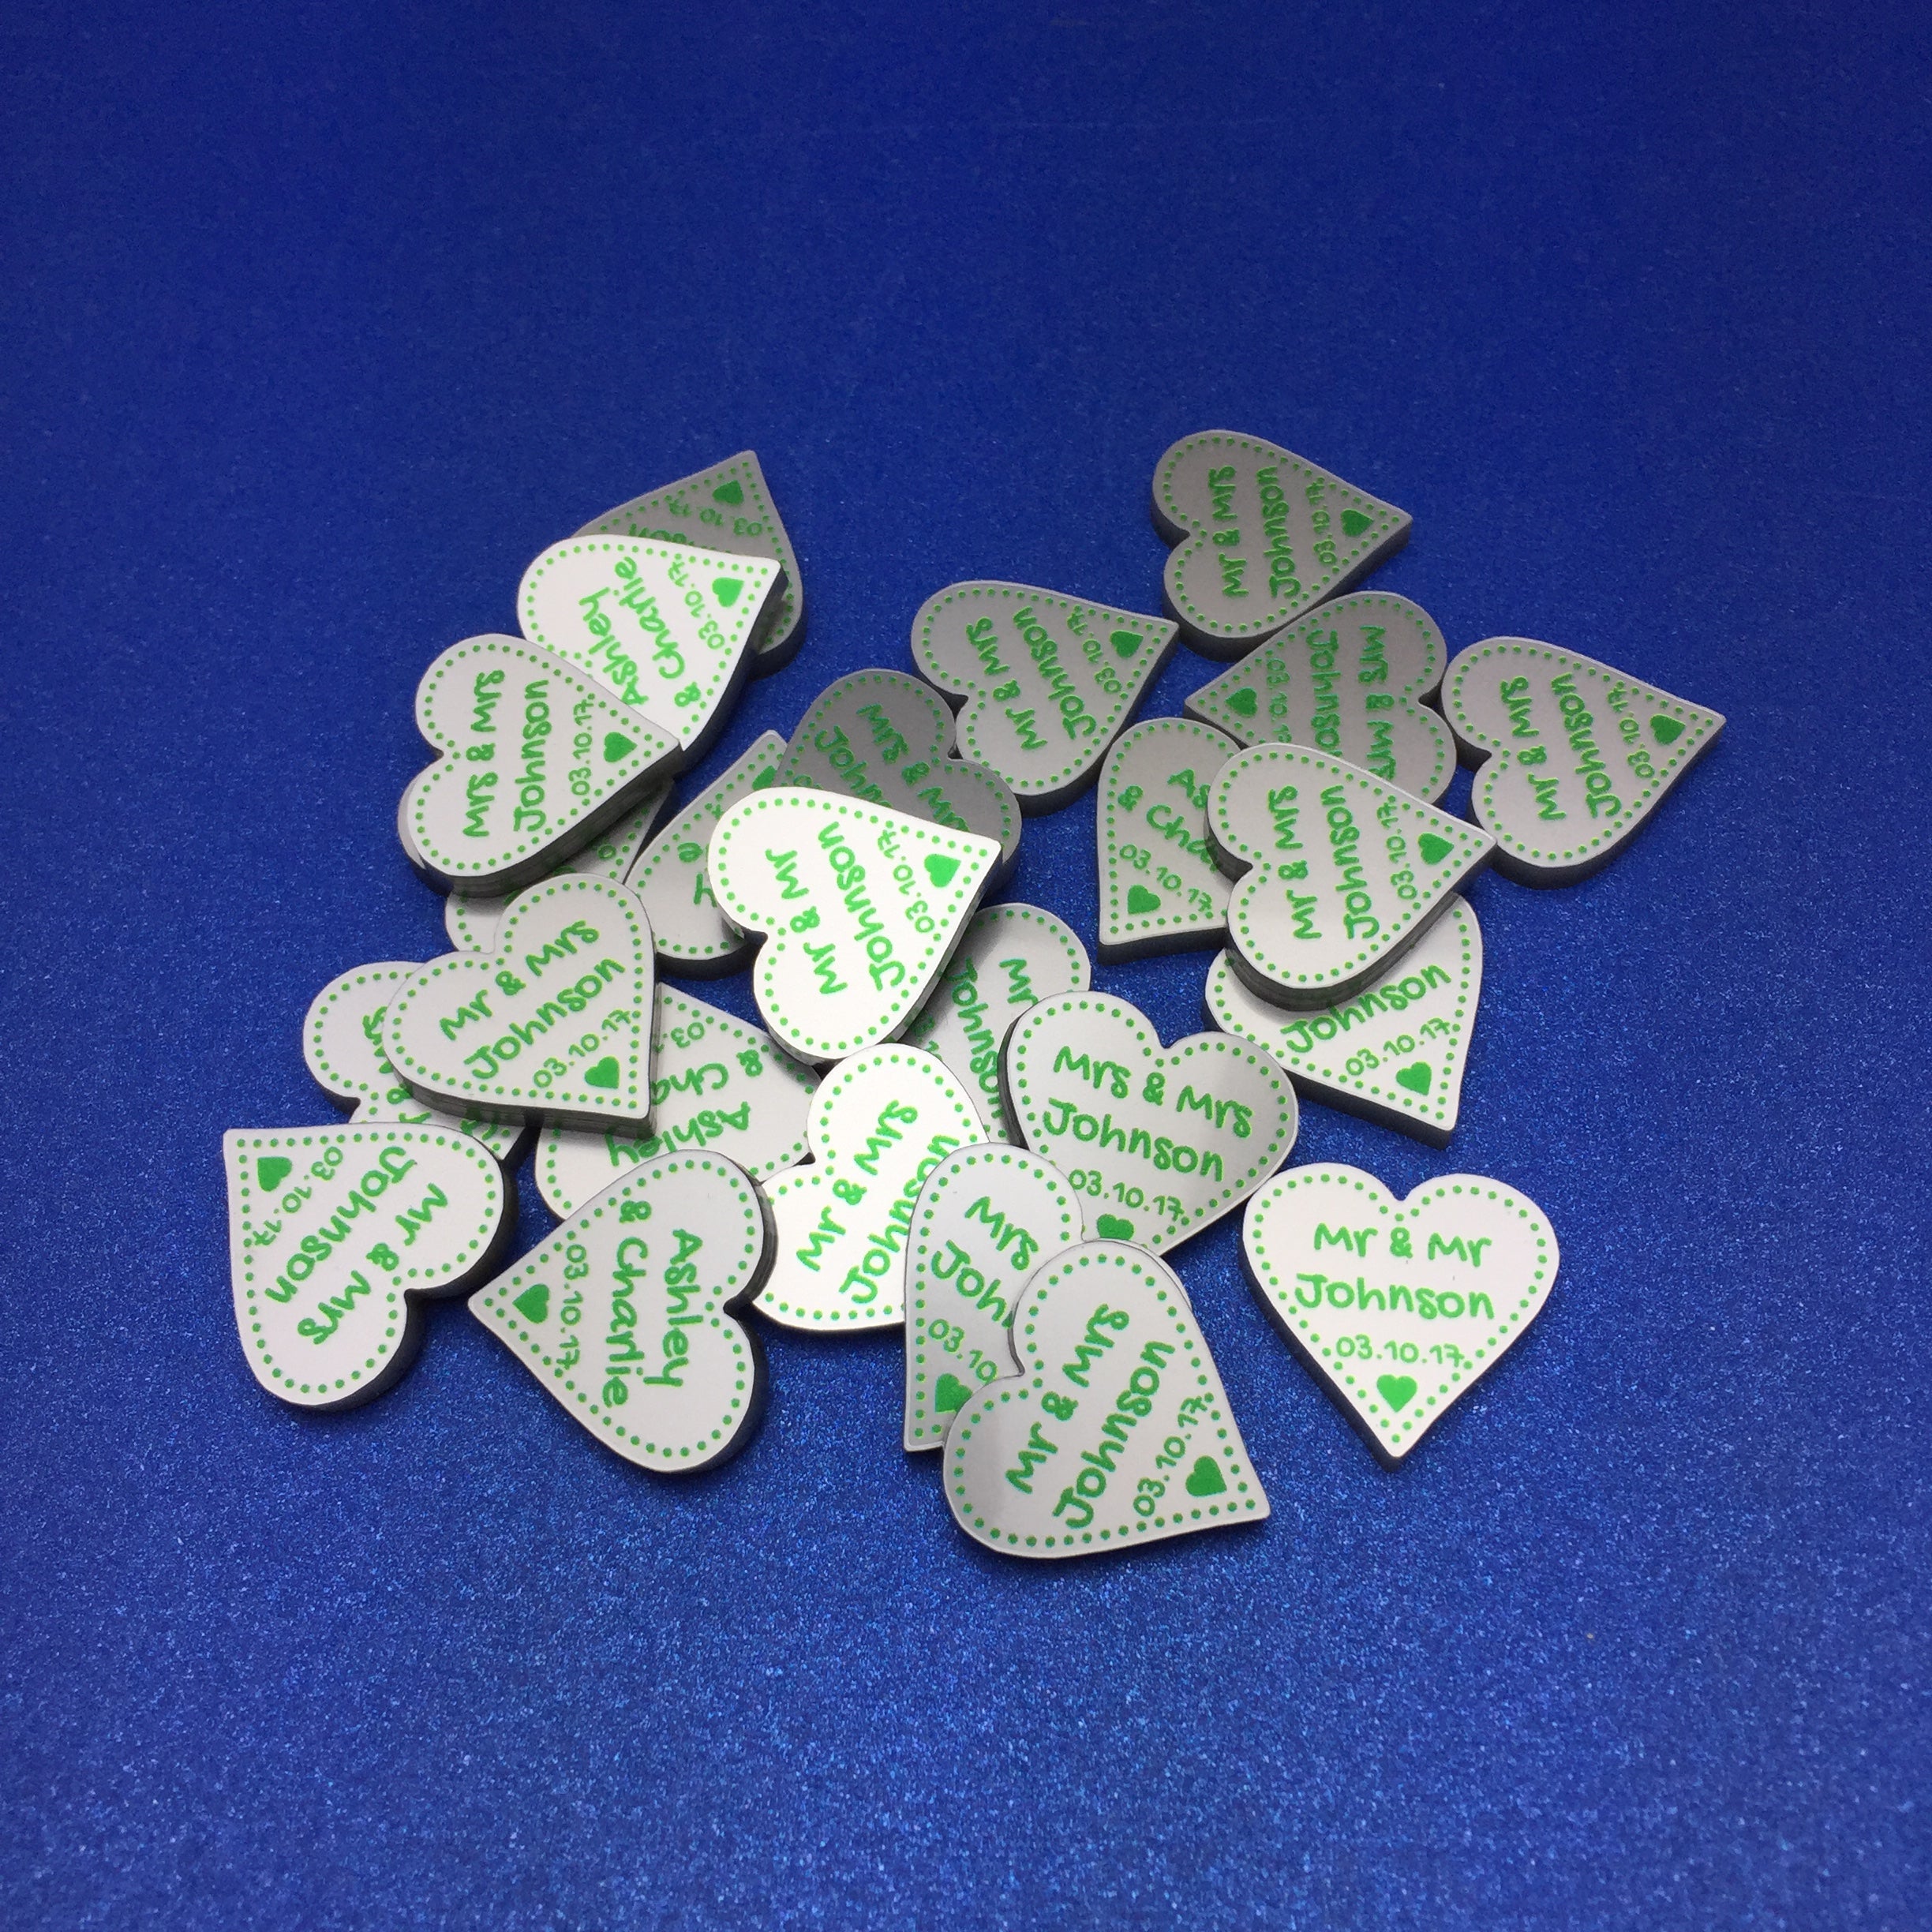 Personalised Wedding Favours - Metallic Silver Acrylic + Green Dotty Love Hearts